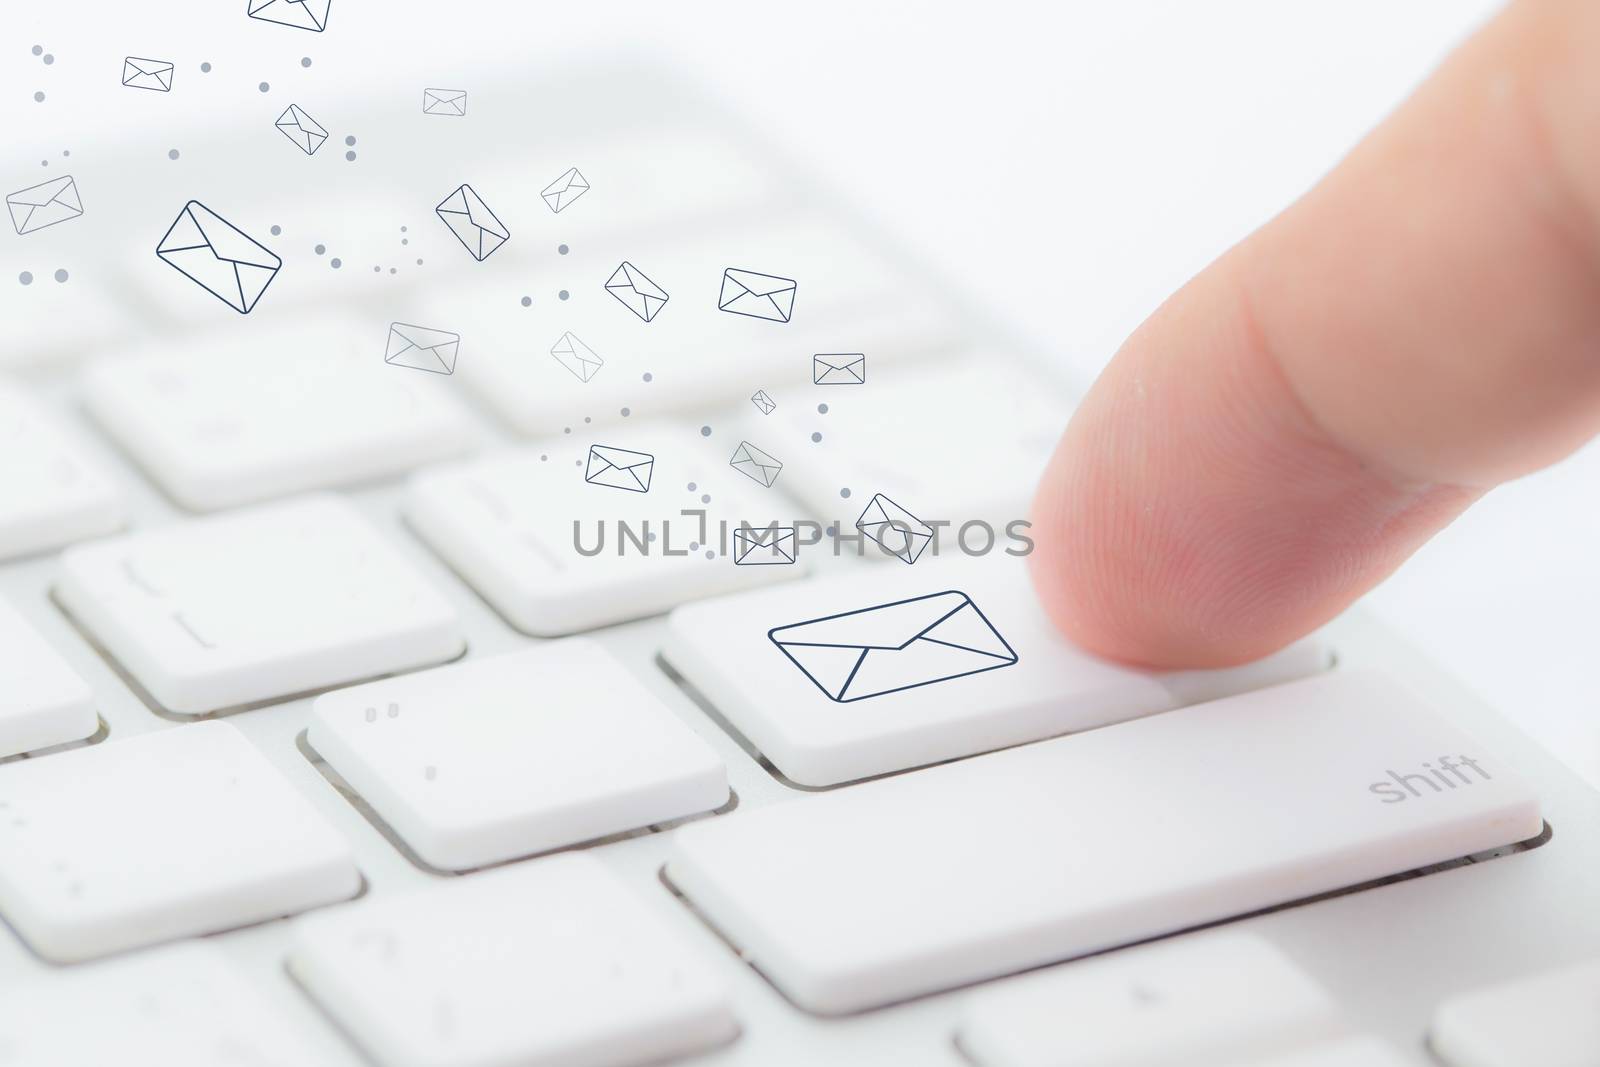 Sending email. gesture of finger pressing send button on a computer keyboard.